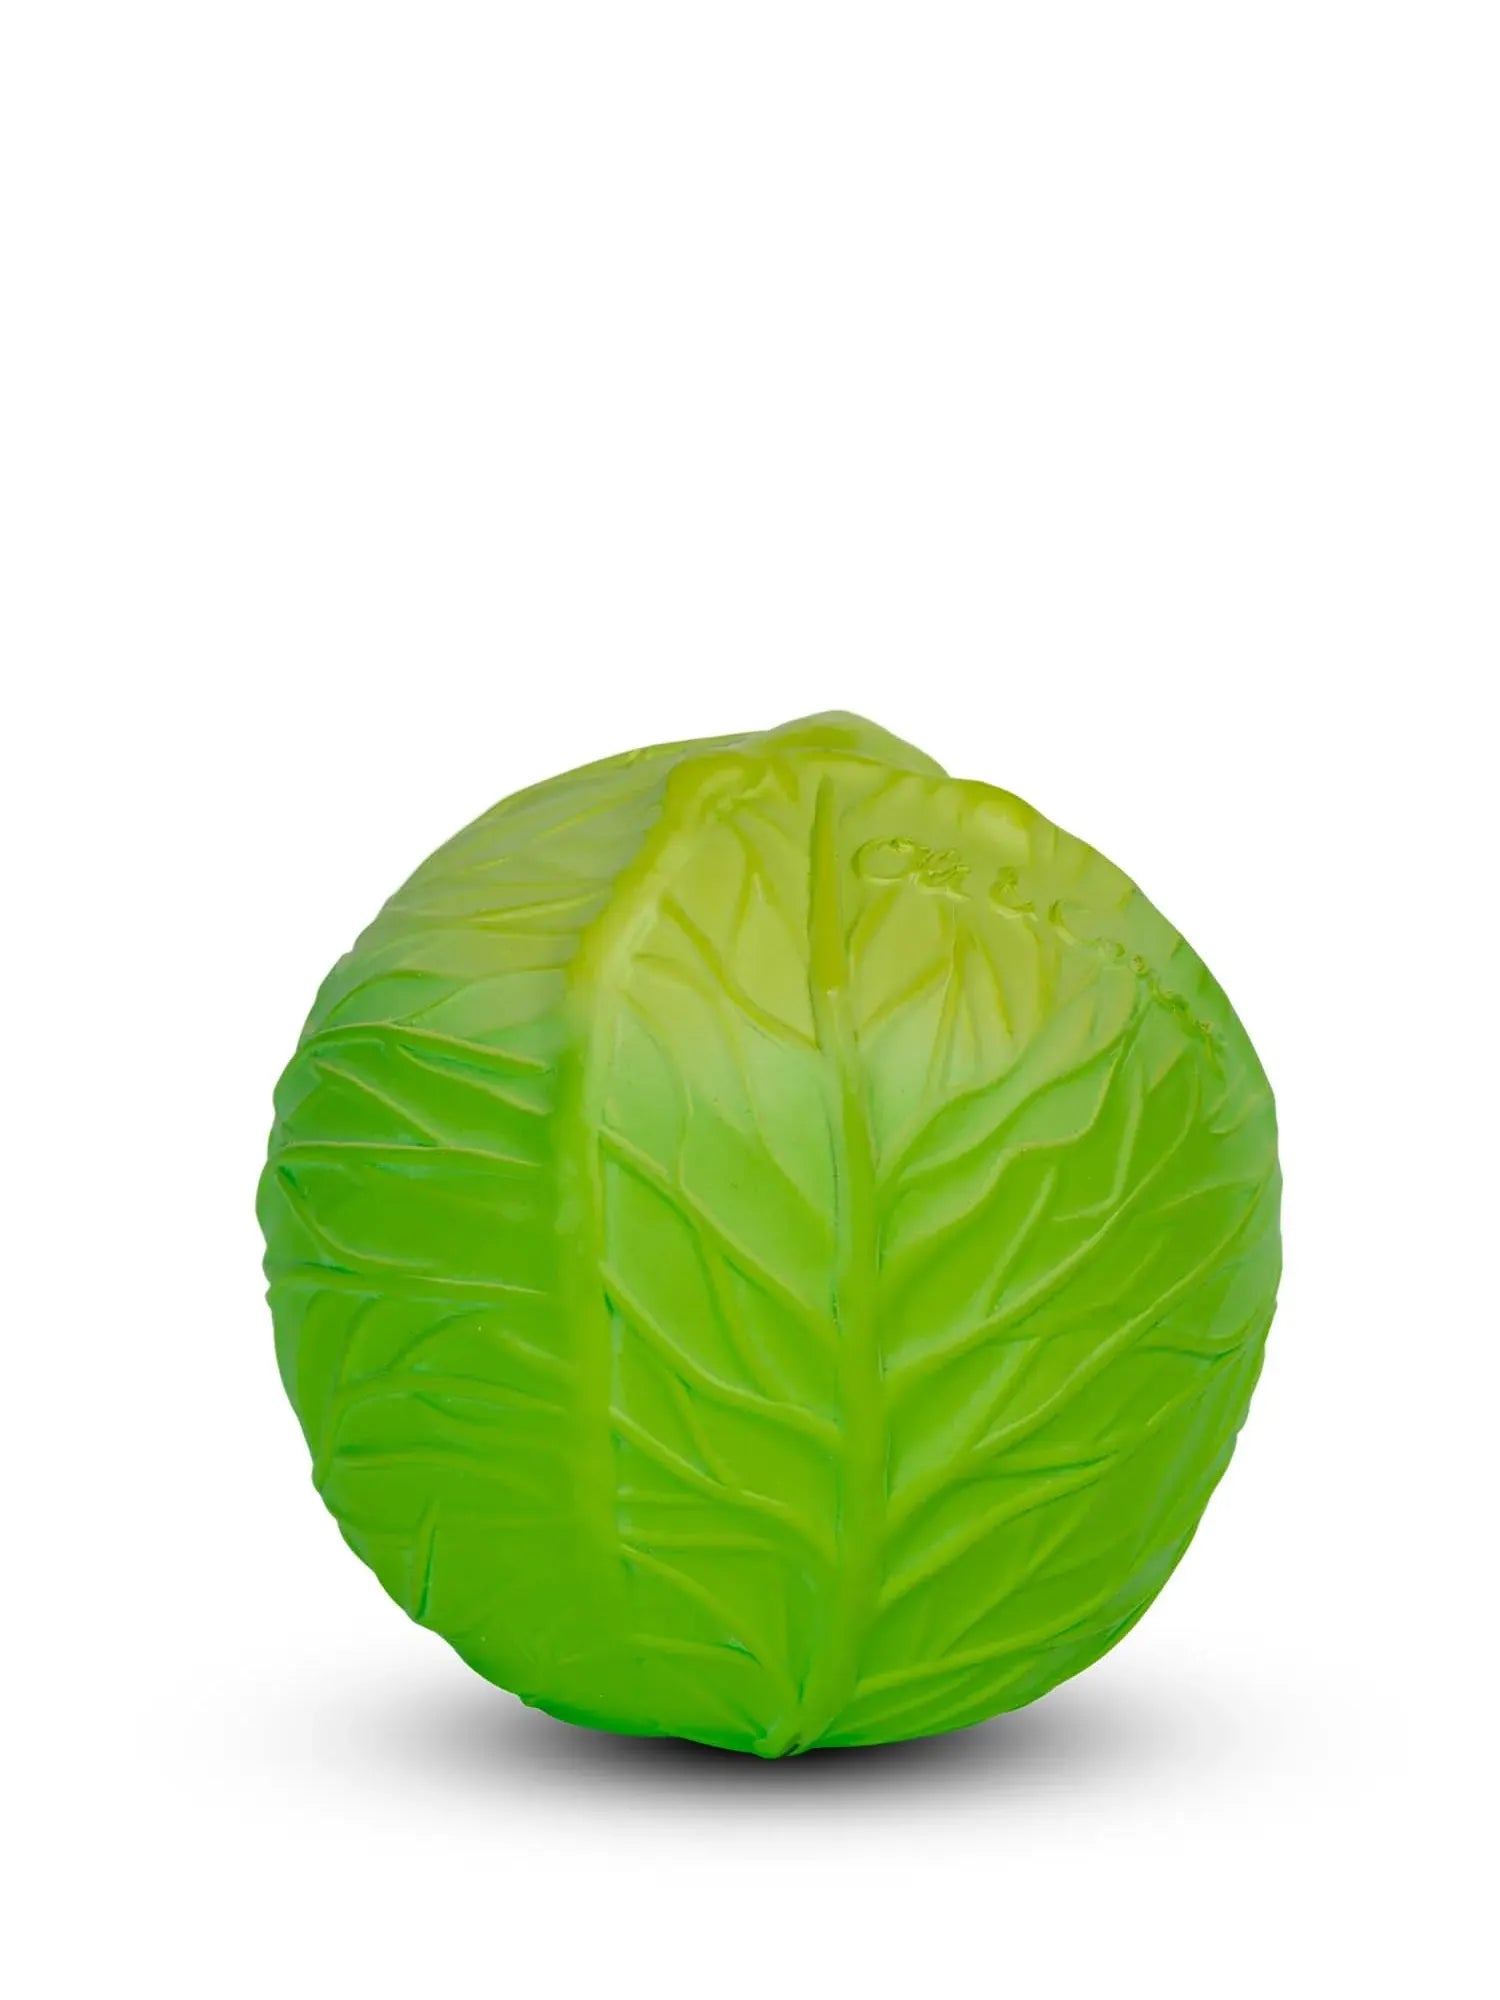 GREEN CABBAGE EDUCATIONAL BALL